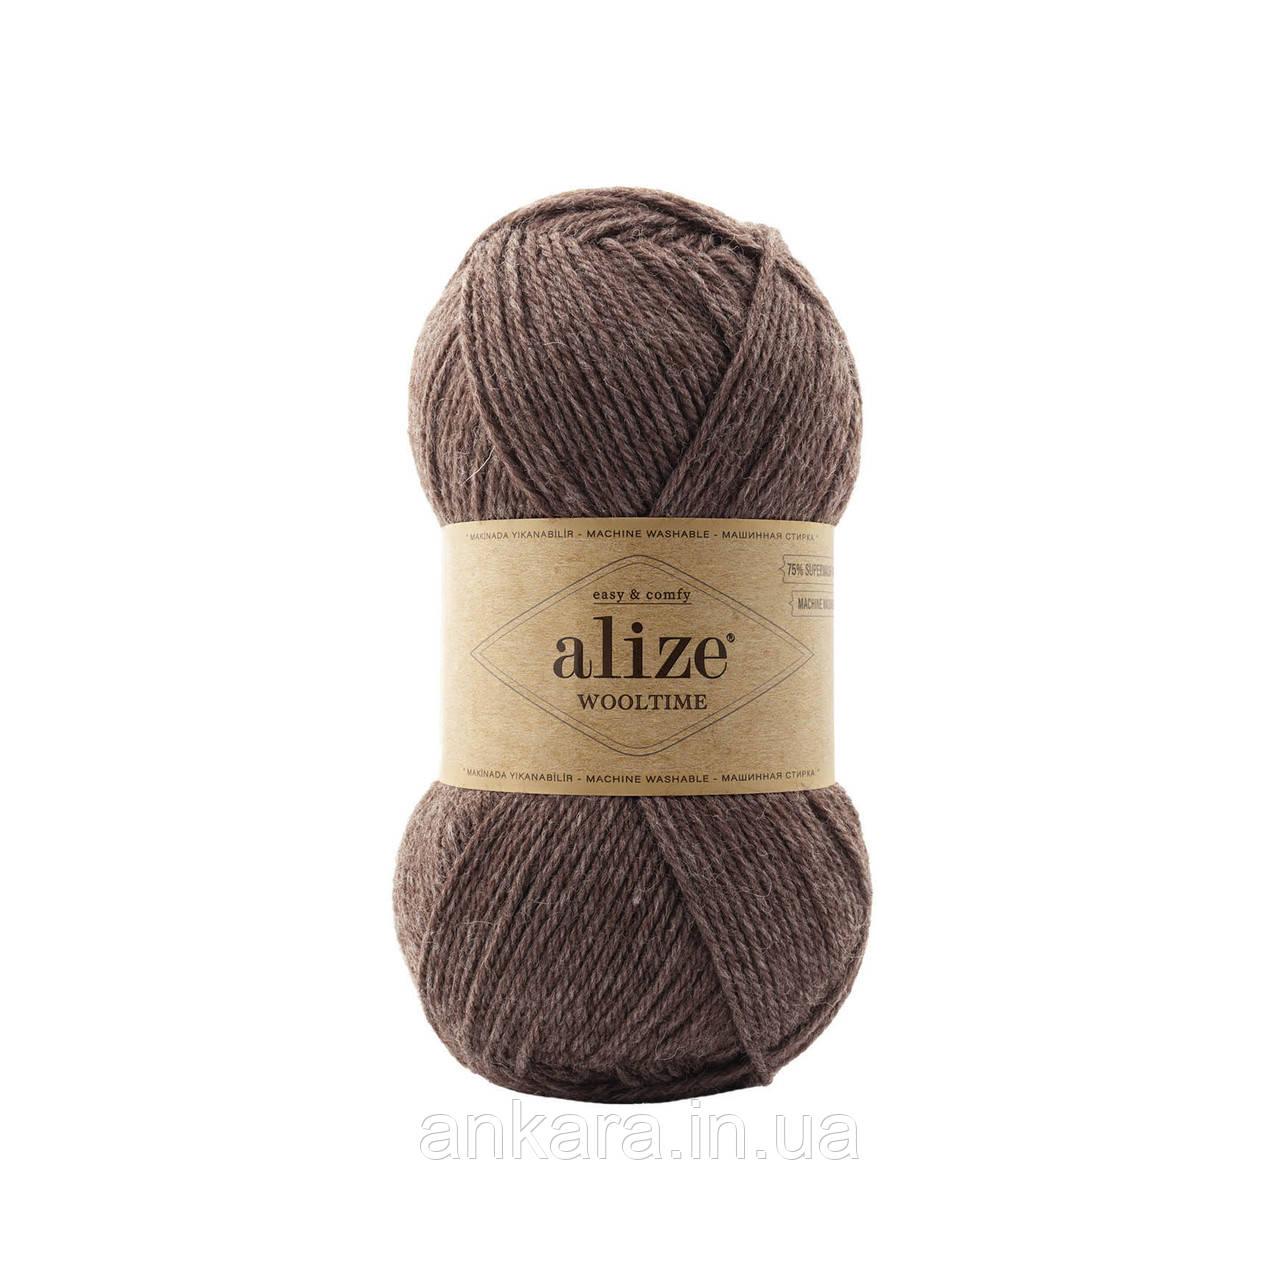 Alize Wooltime 240